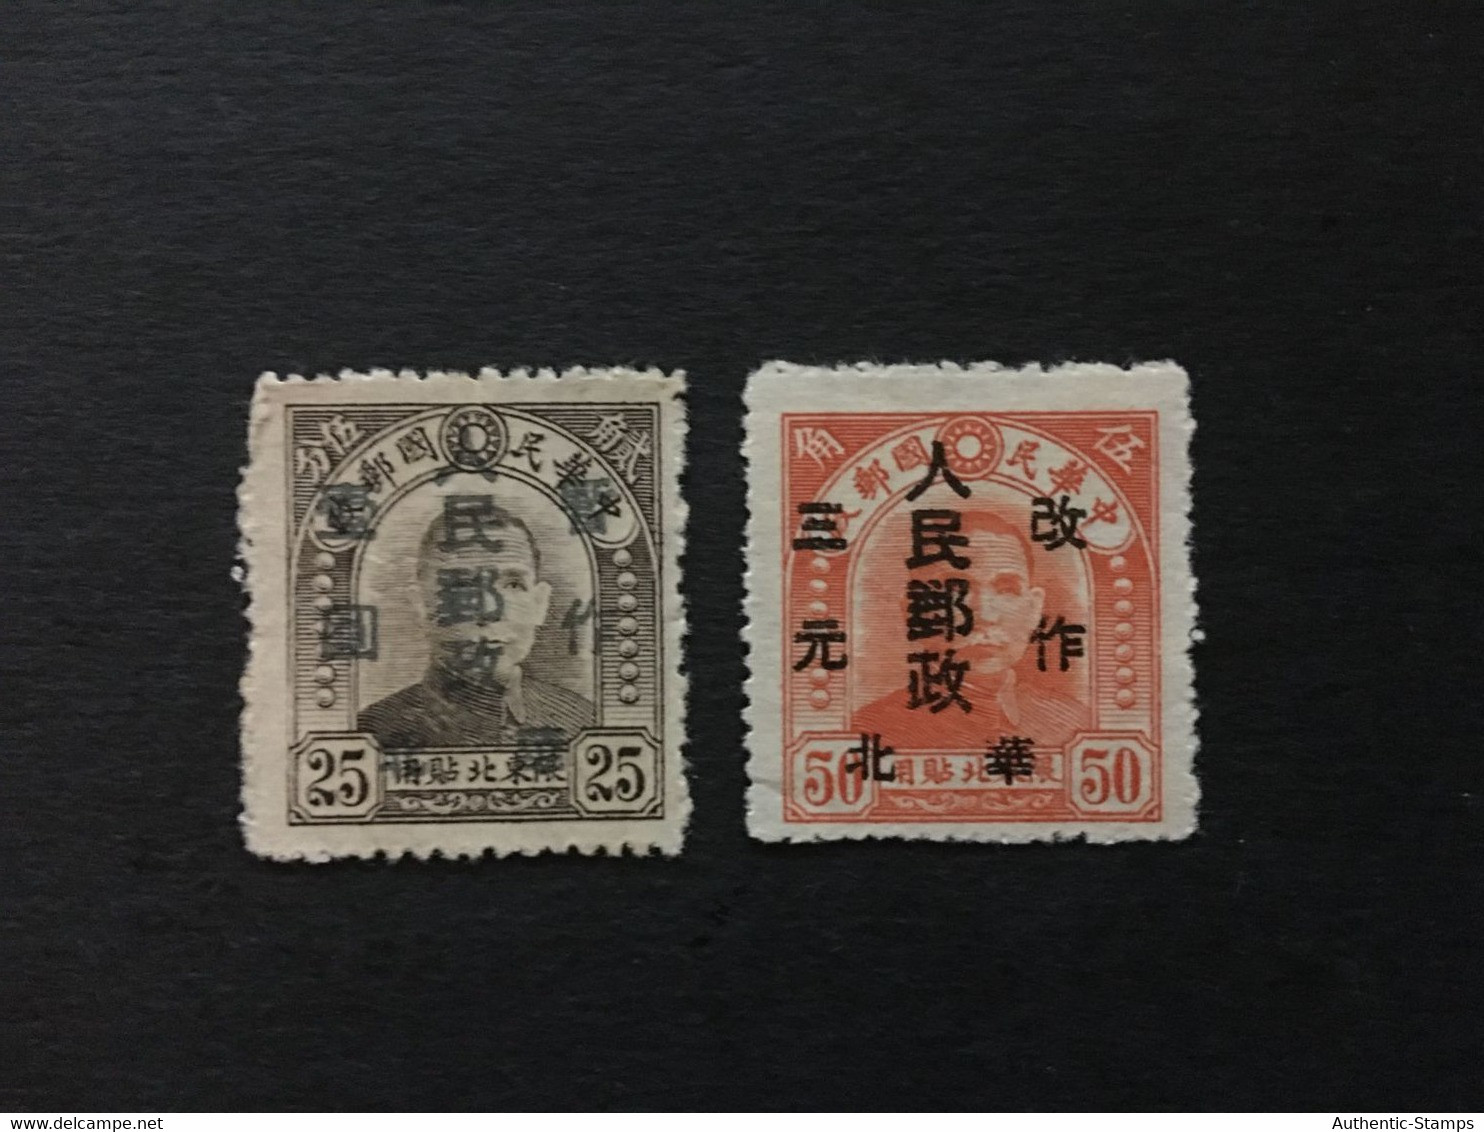 China Stamp Set, Overprint, Liberated Area, CINA,CHINE,LIST1362 - Chine Du Nord 1949-50